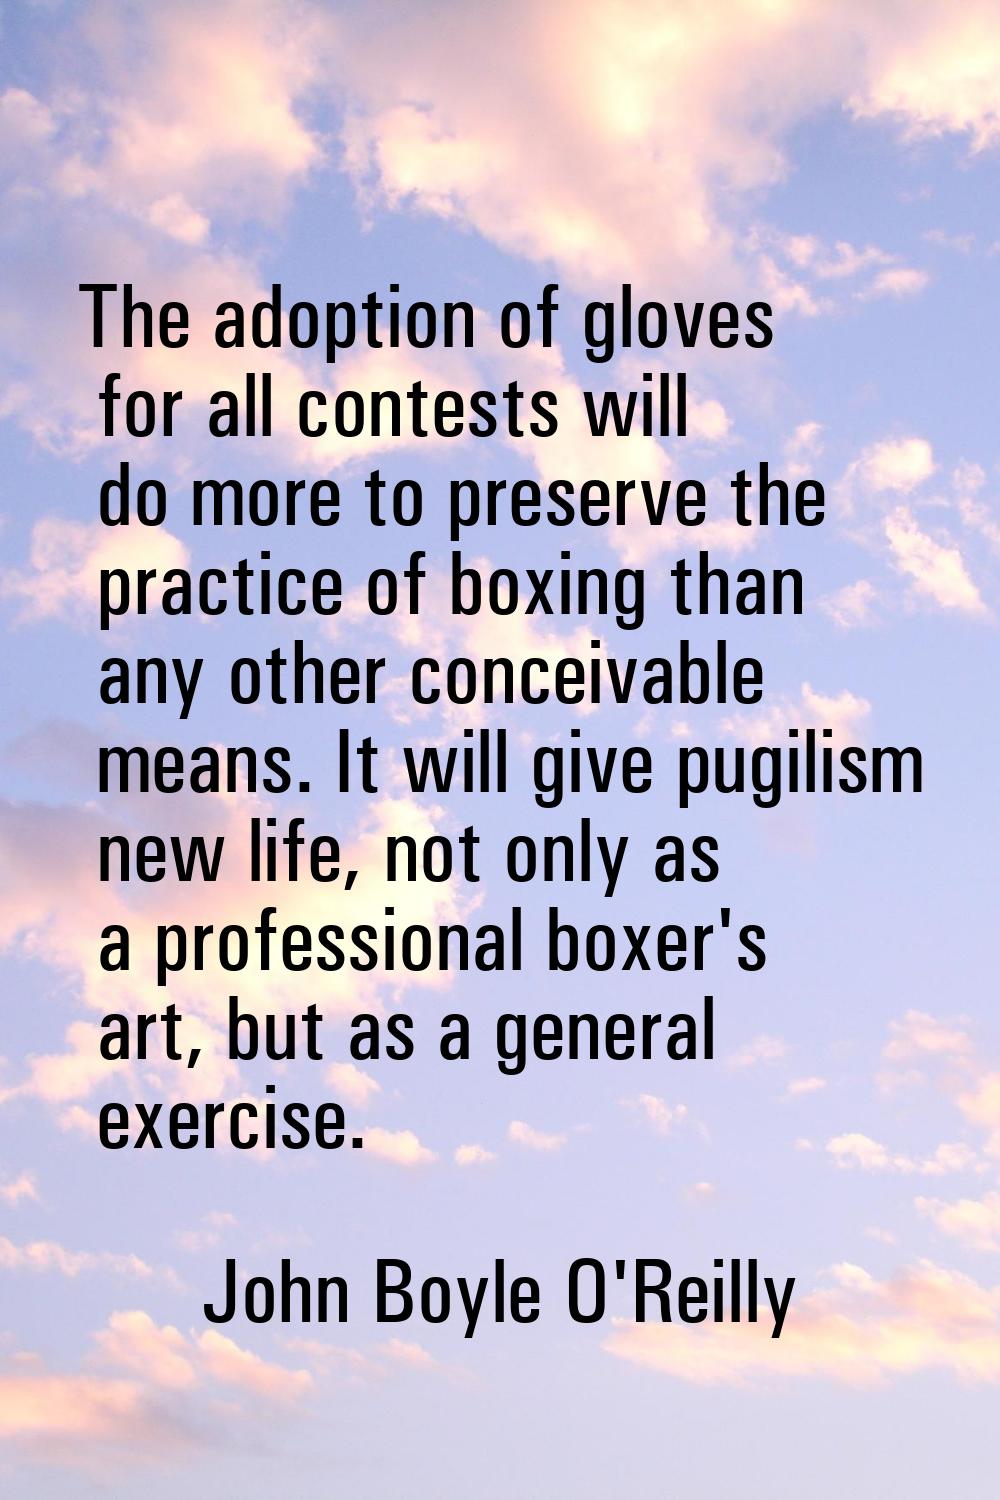 The adoption of gloves for all contests will do more to preserve the practice of boxing than any ot